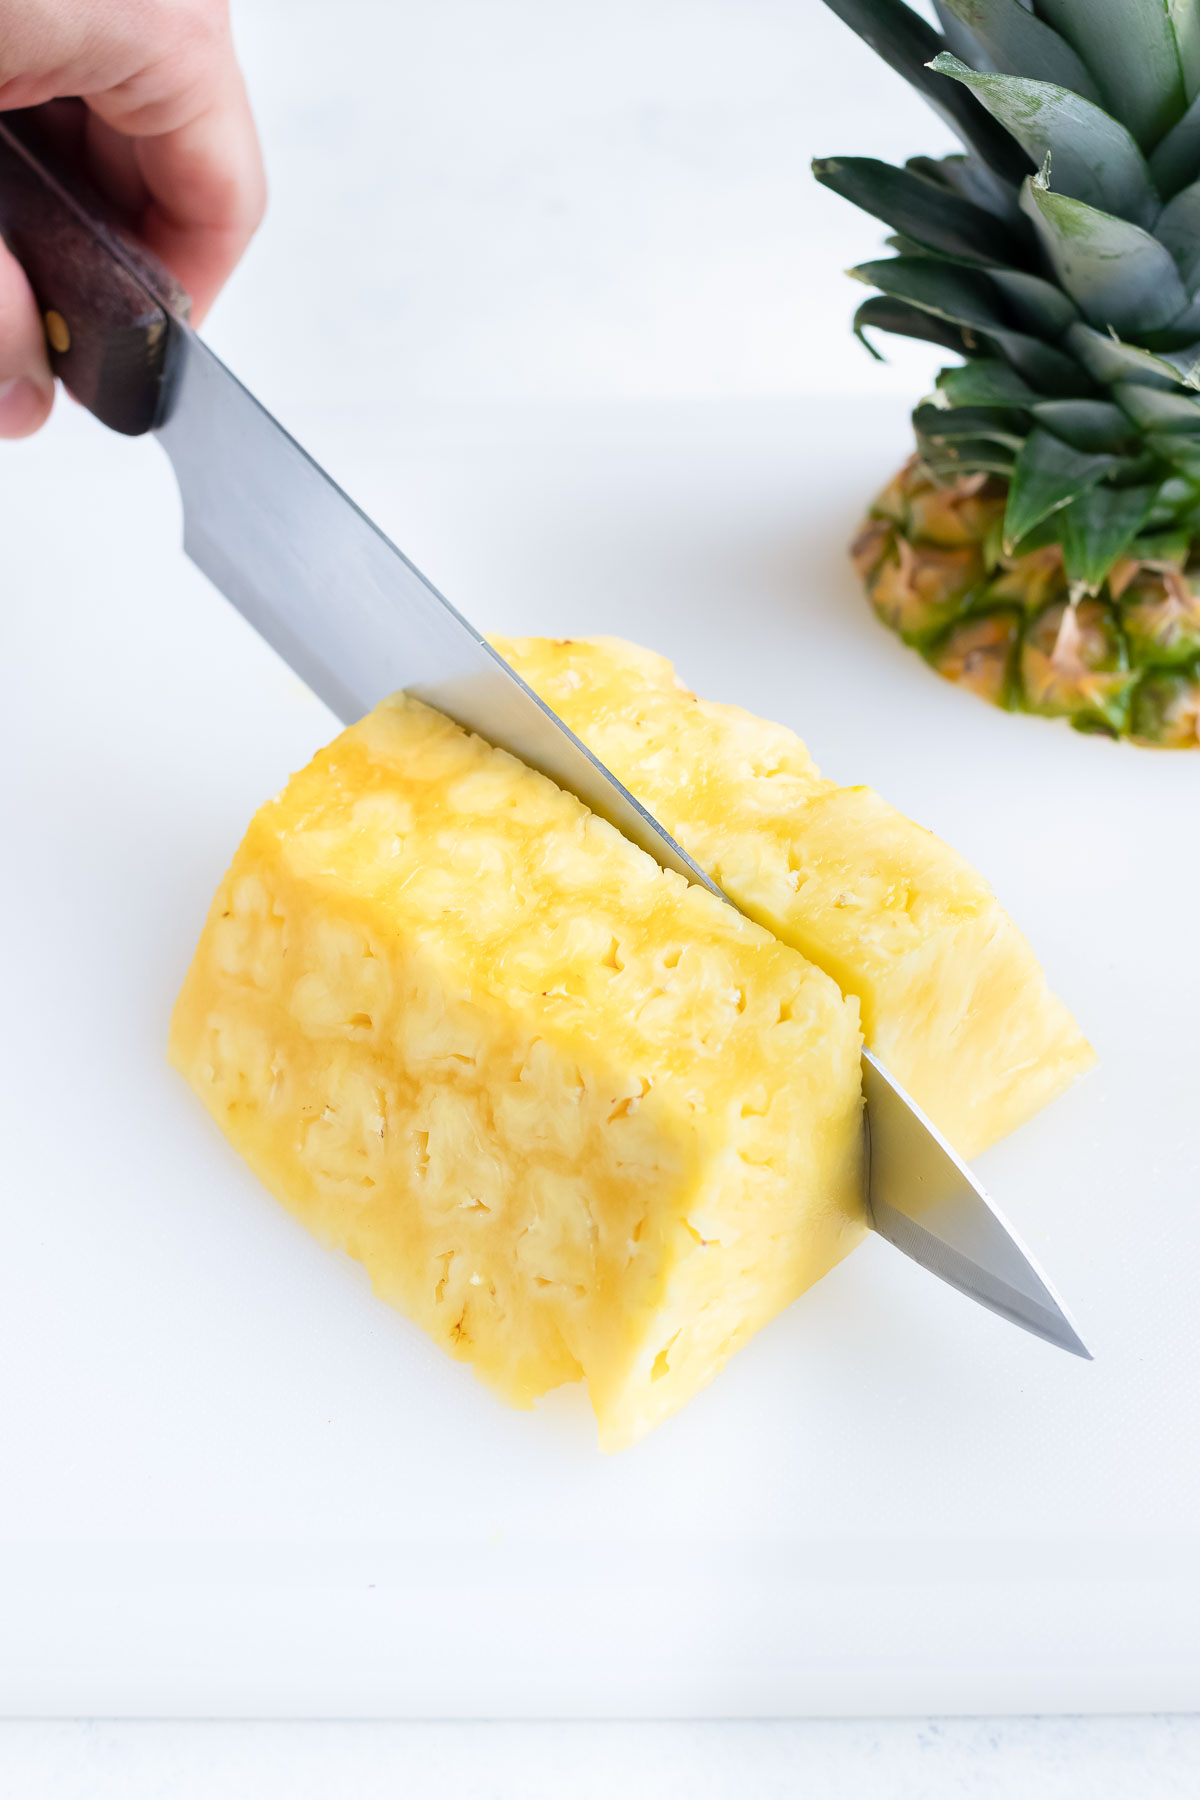 The half of the pineapple is laid on the counter and cut into quarters.